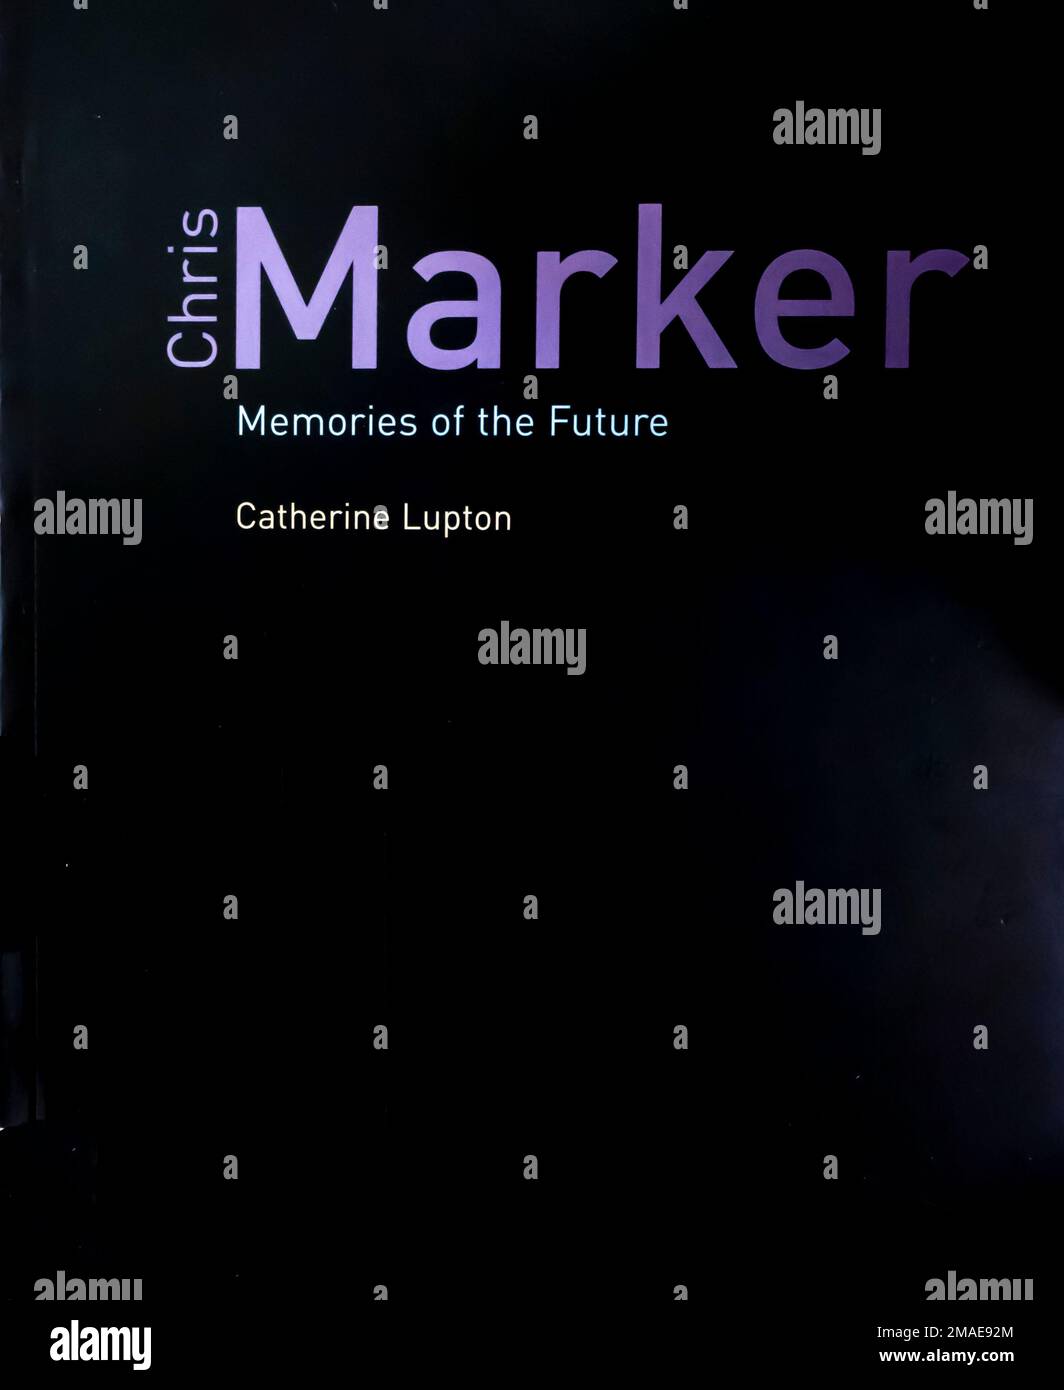 Chris Marker: Memories of the Future Book by Catherine Lupton 2004 Stock Photo